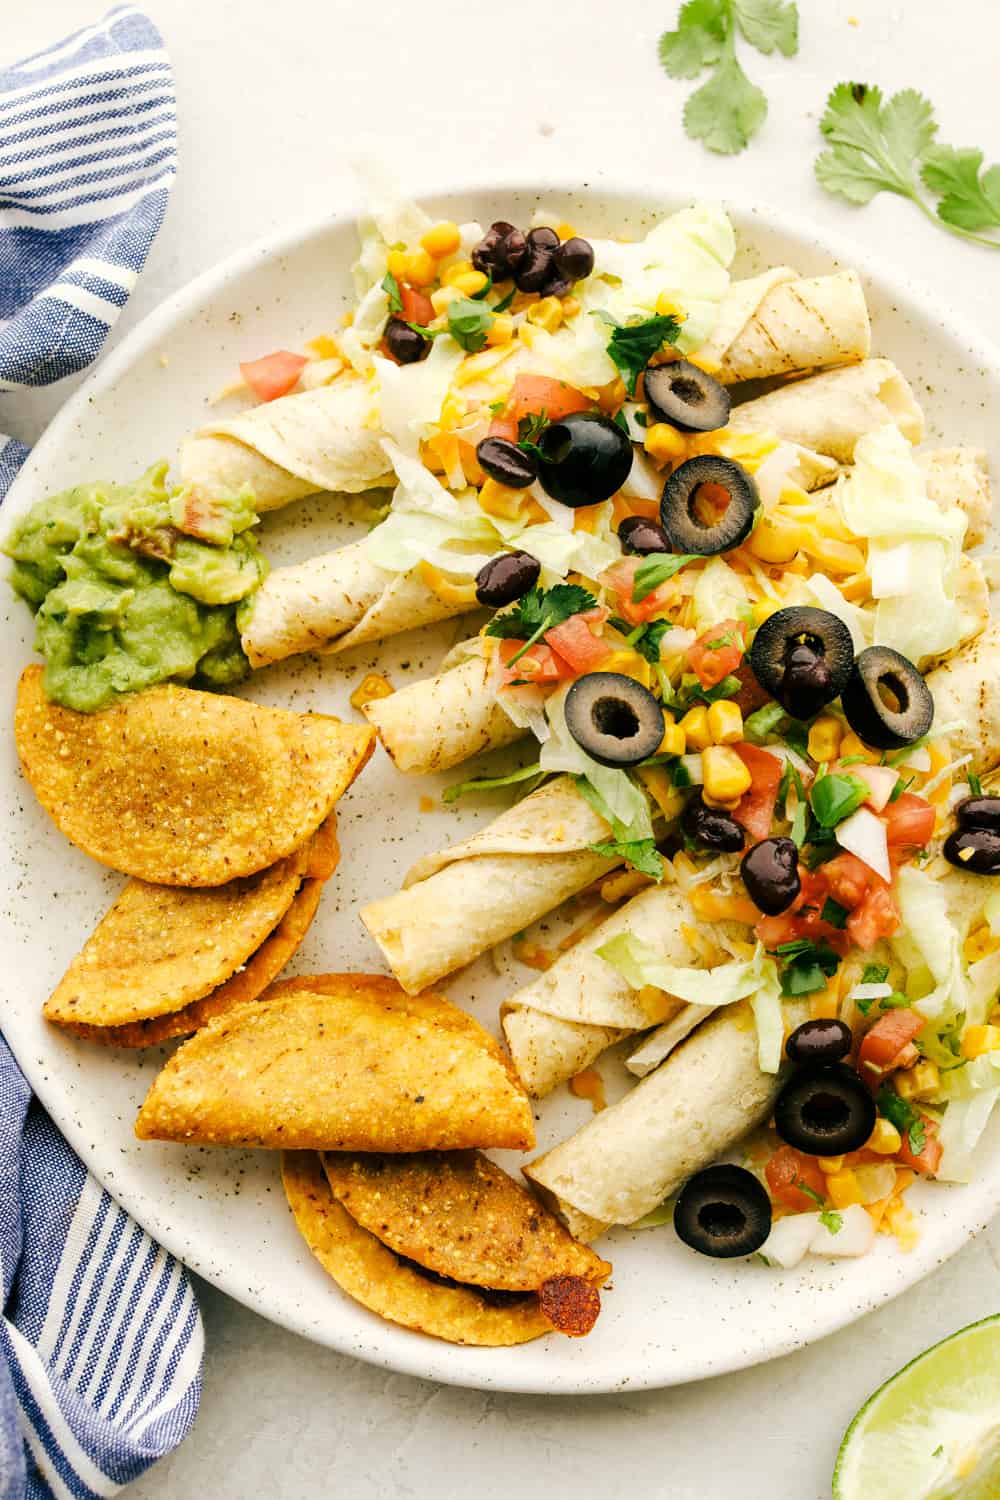 Taquitos smothered with cheese, olives, corn and tomatoes with tacos and guacamole on the side.